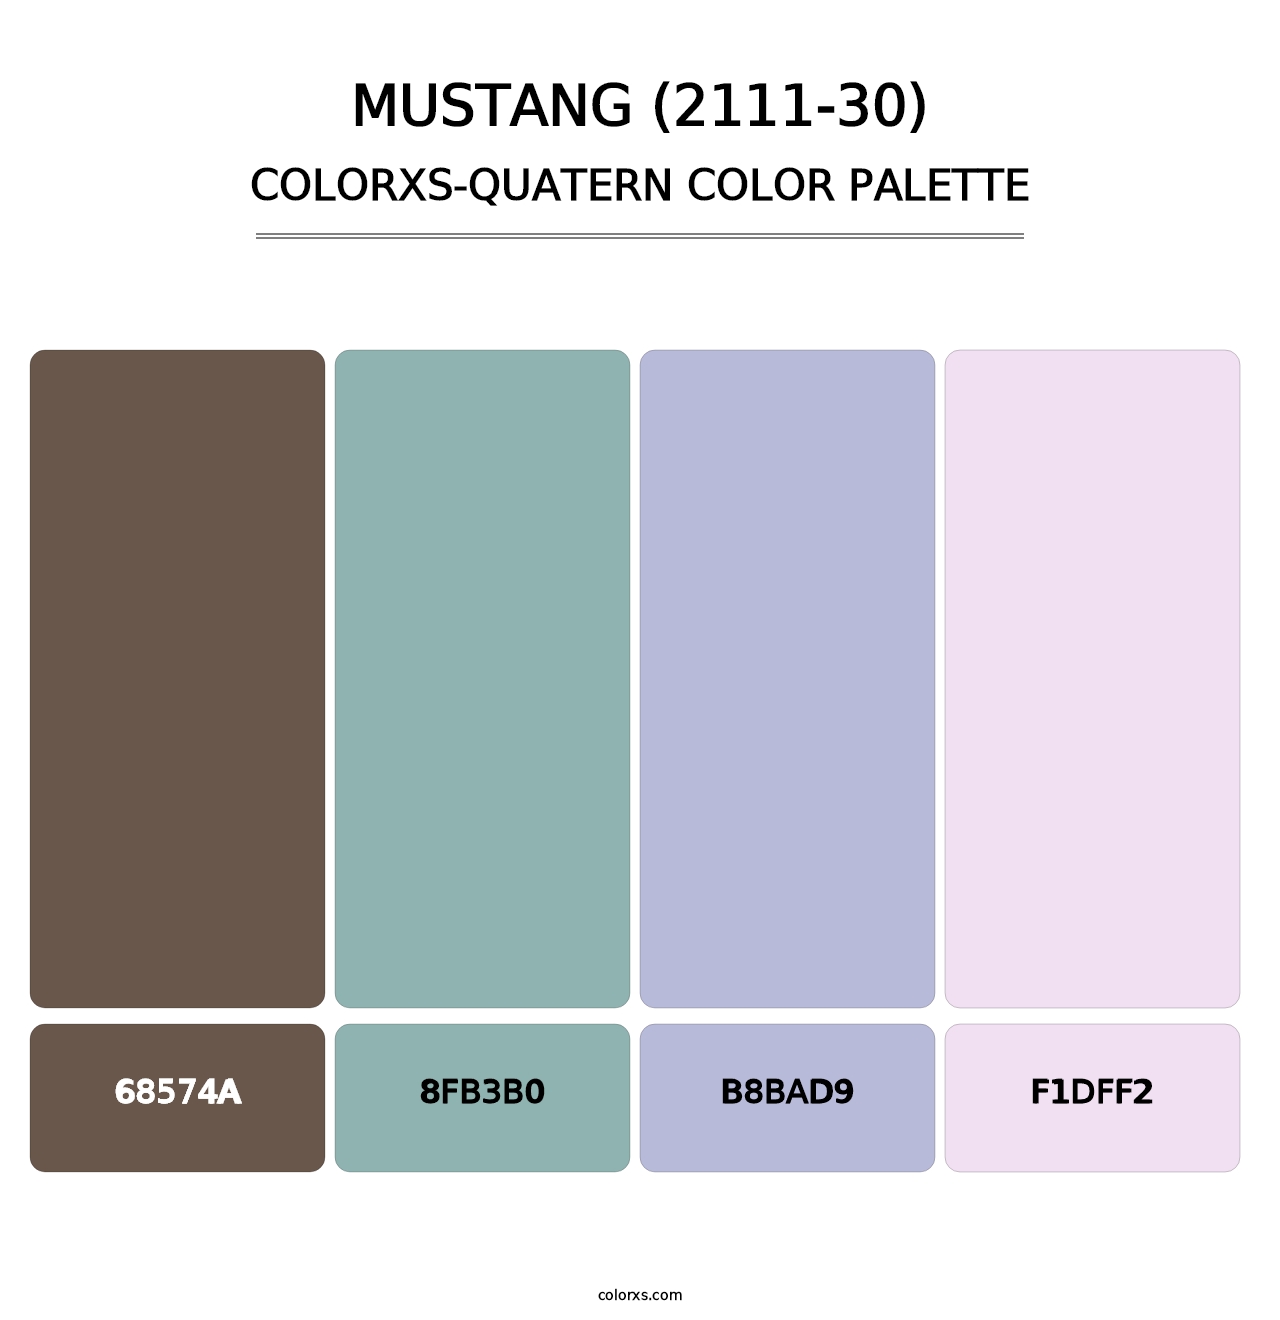 Mustang (2111-30) - Colorxs Quatern Palette